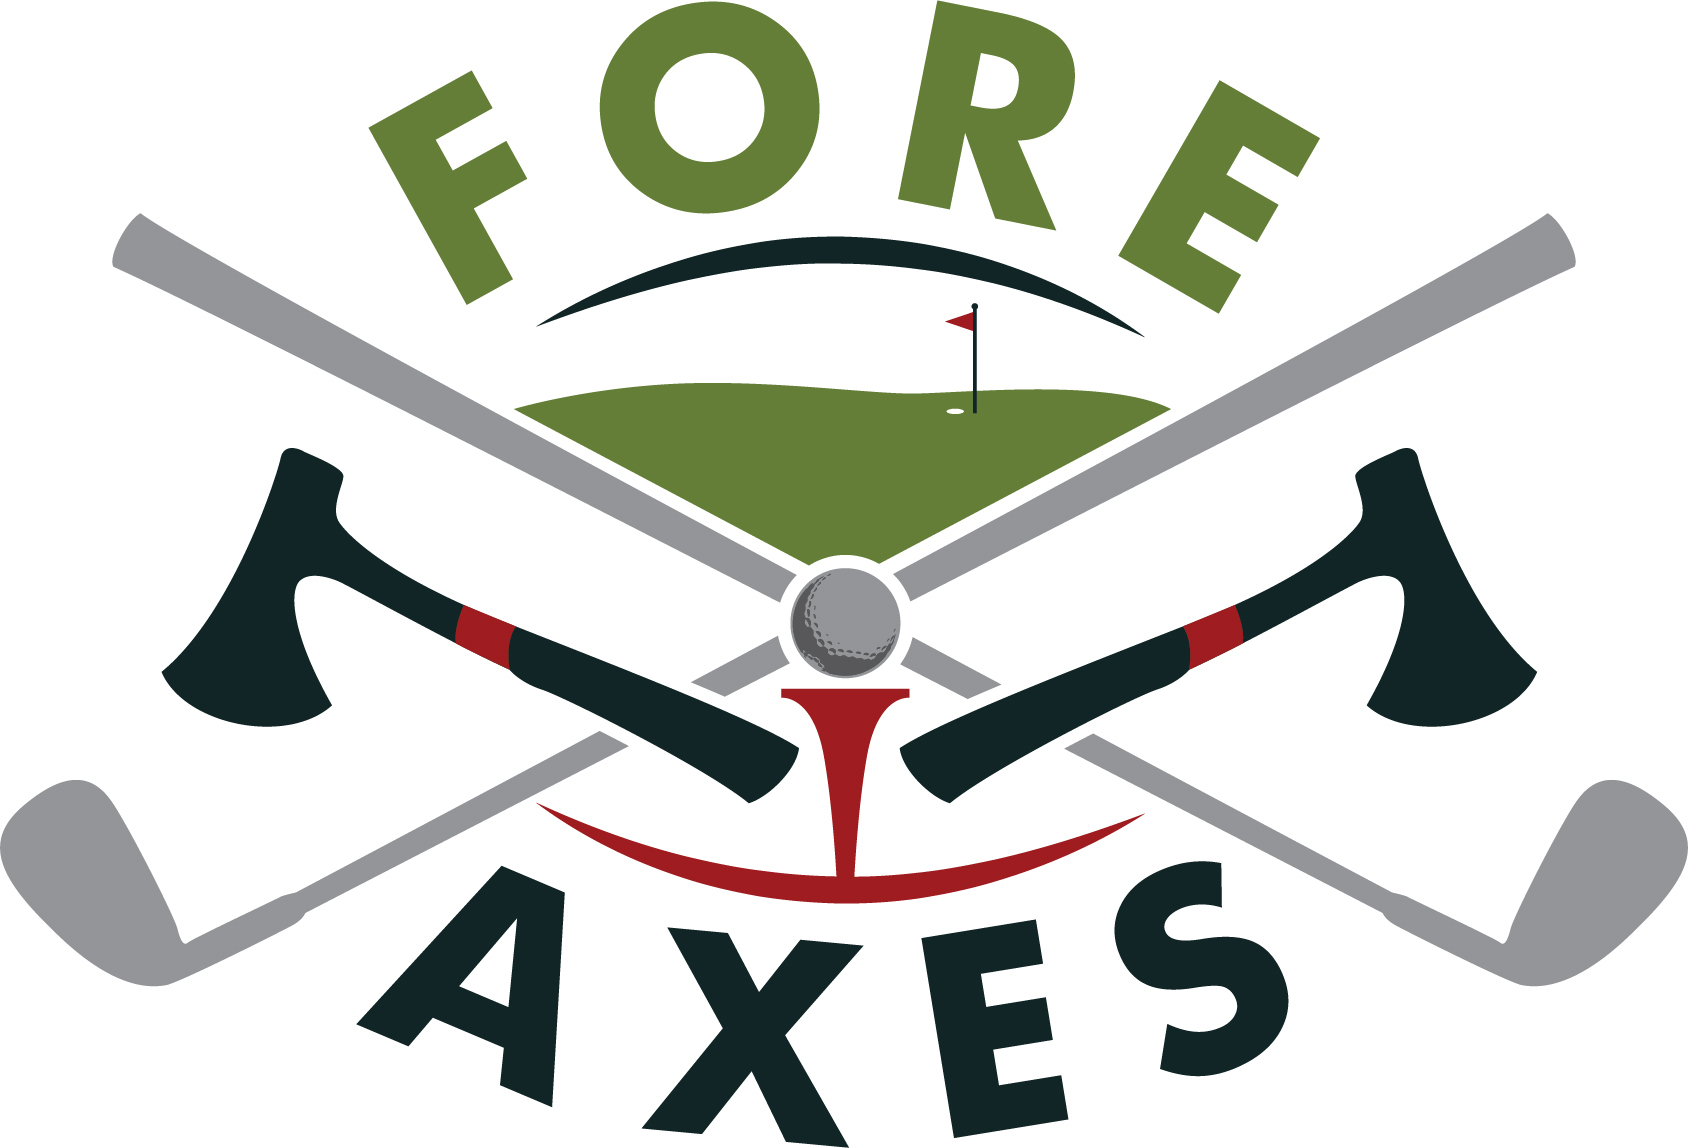 Fore Axes